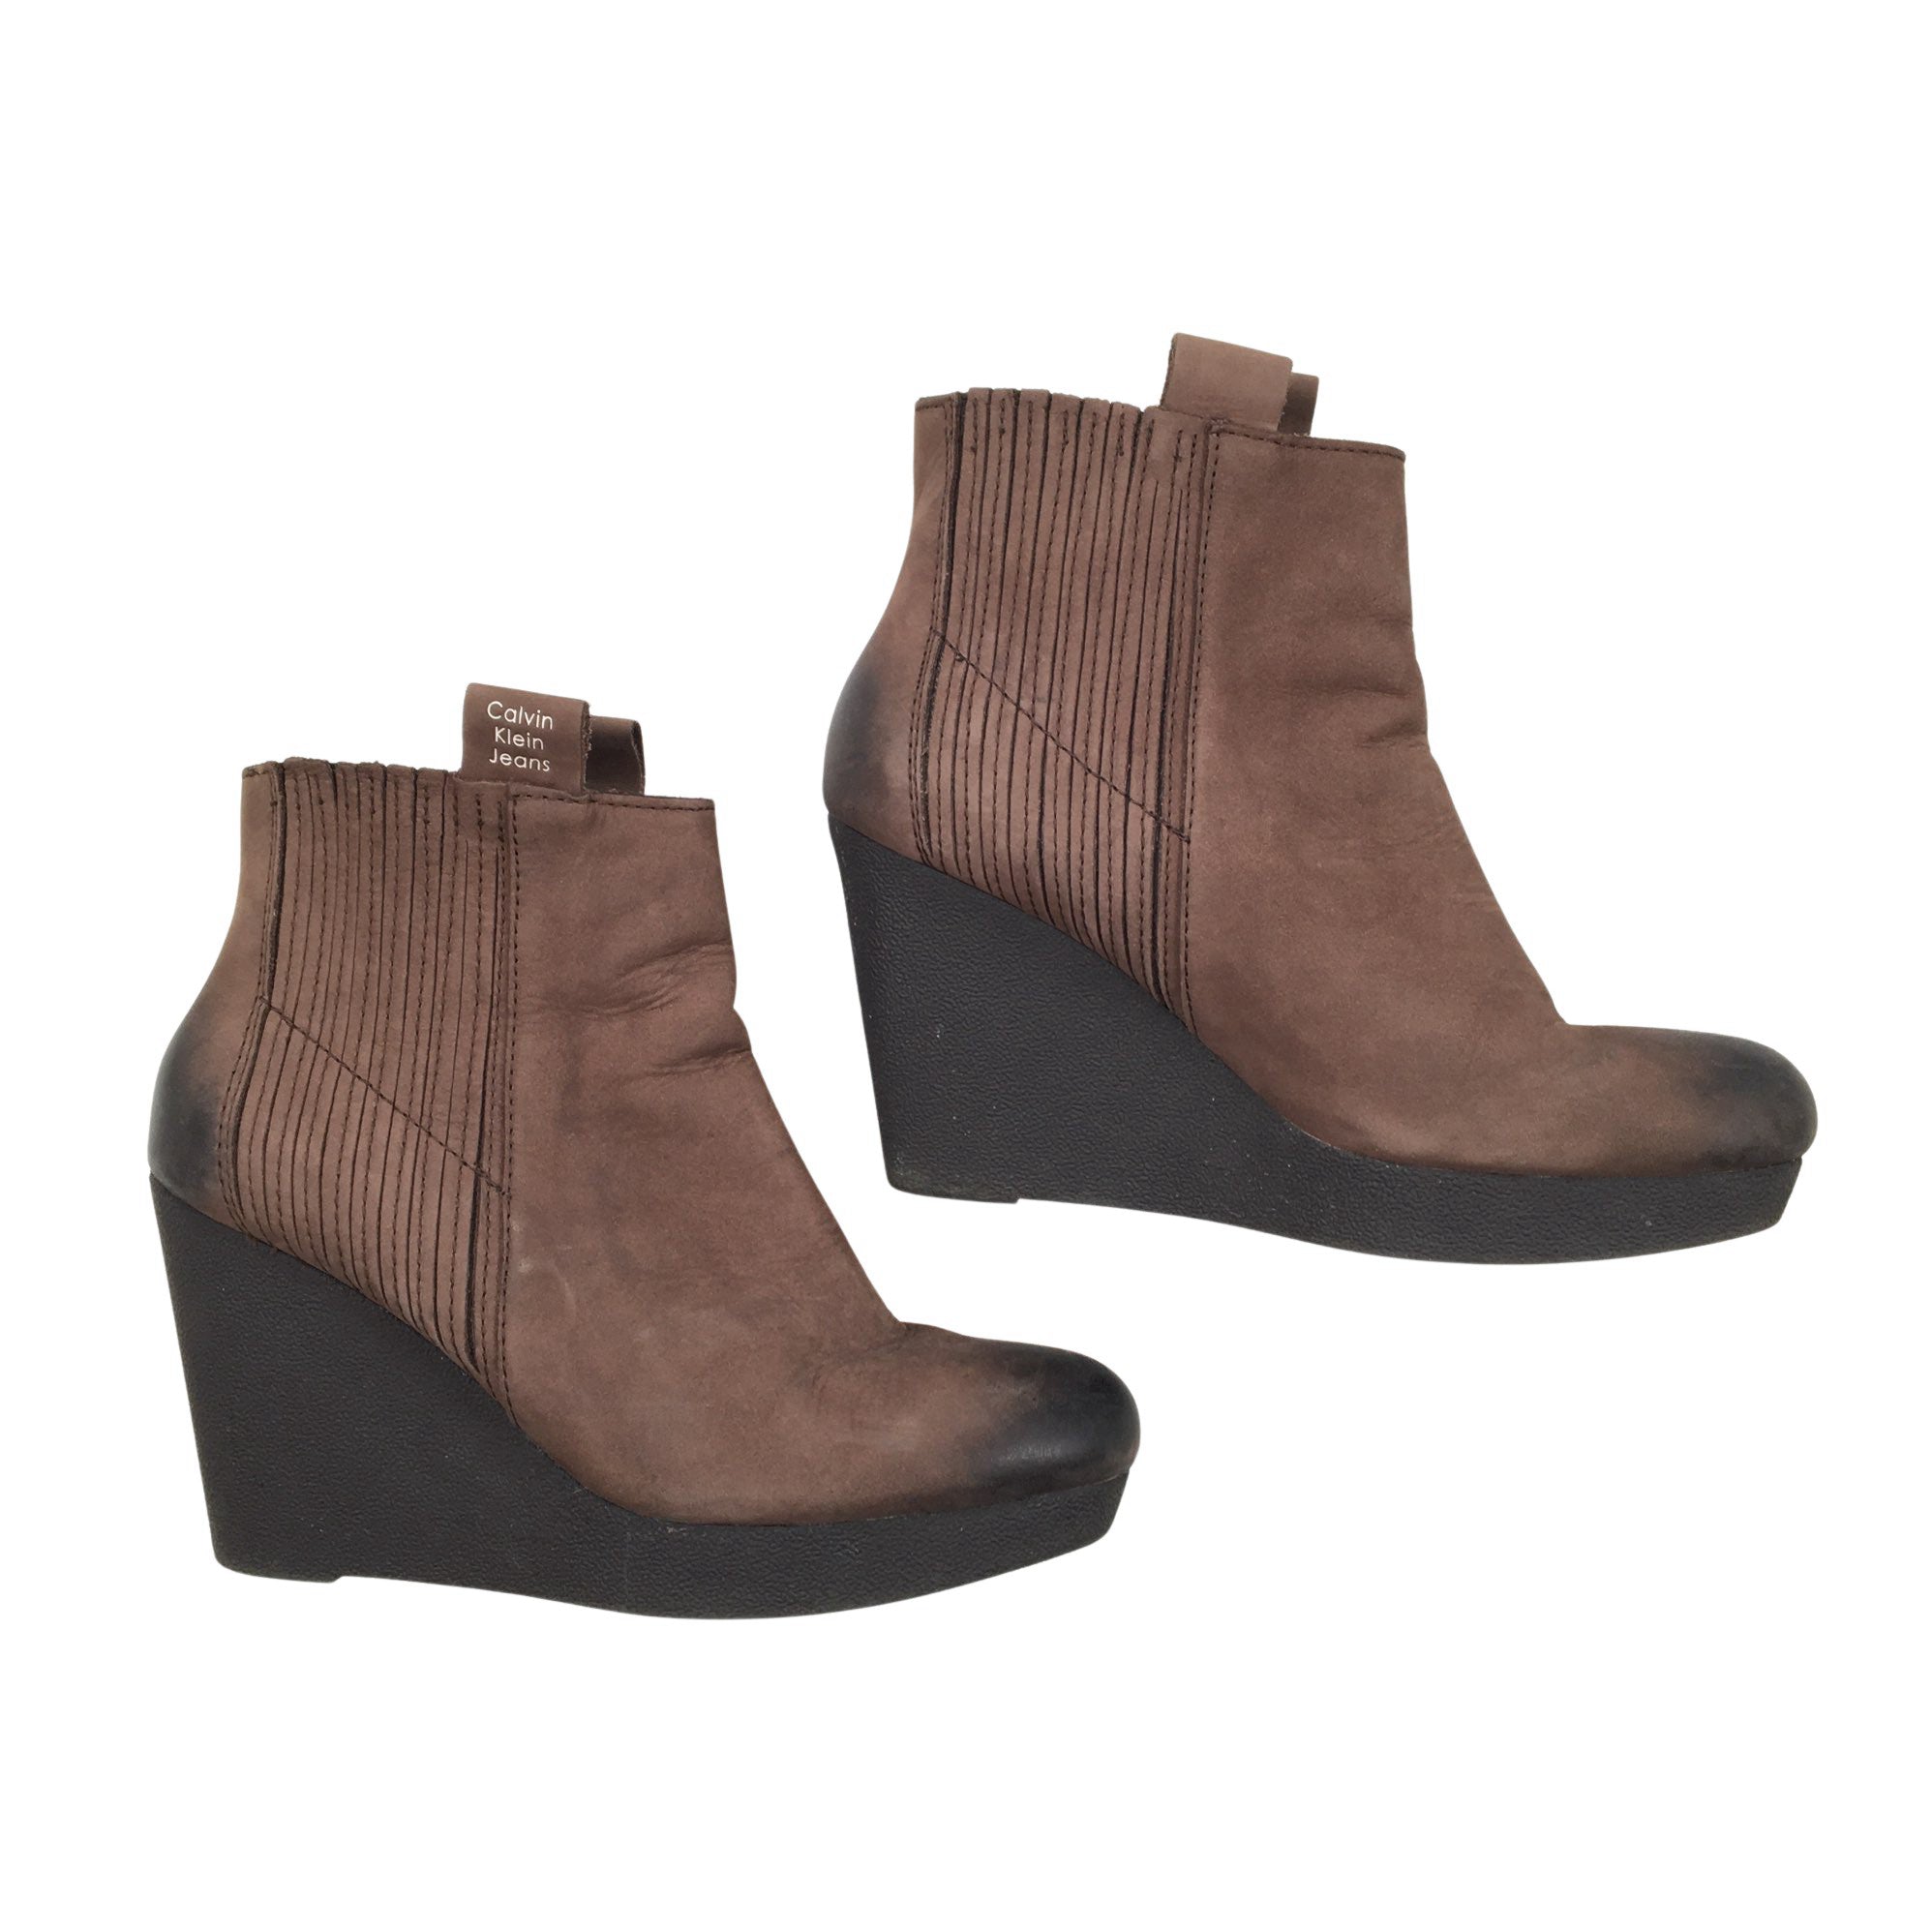 Women's Calvin Klein Jeans Ankle boots, size 40 (Brown) | Emmy